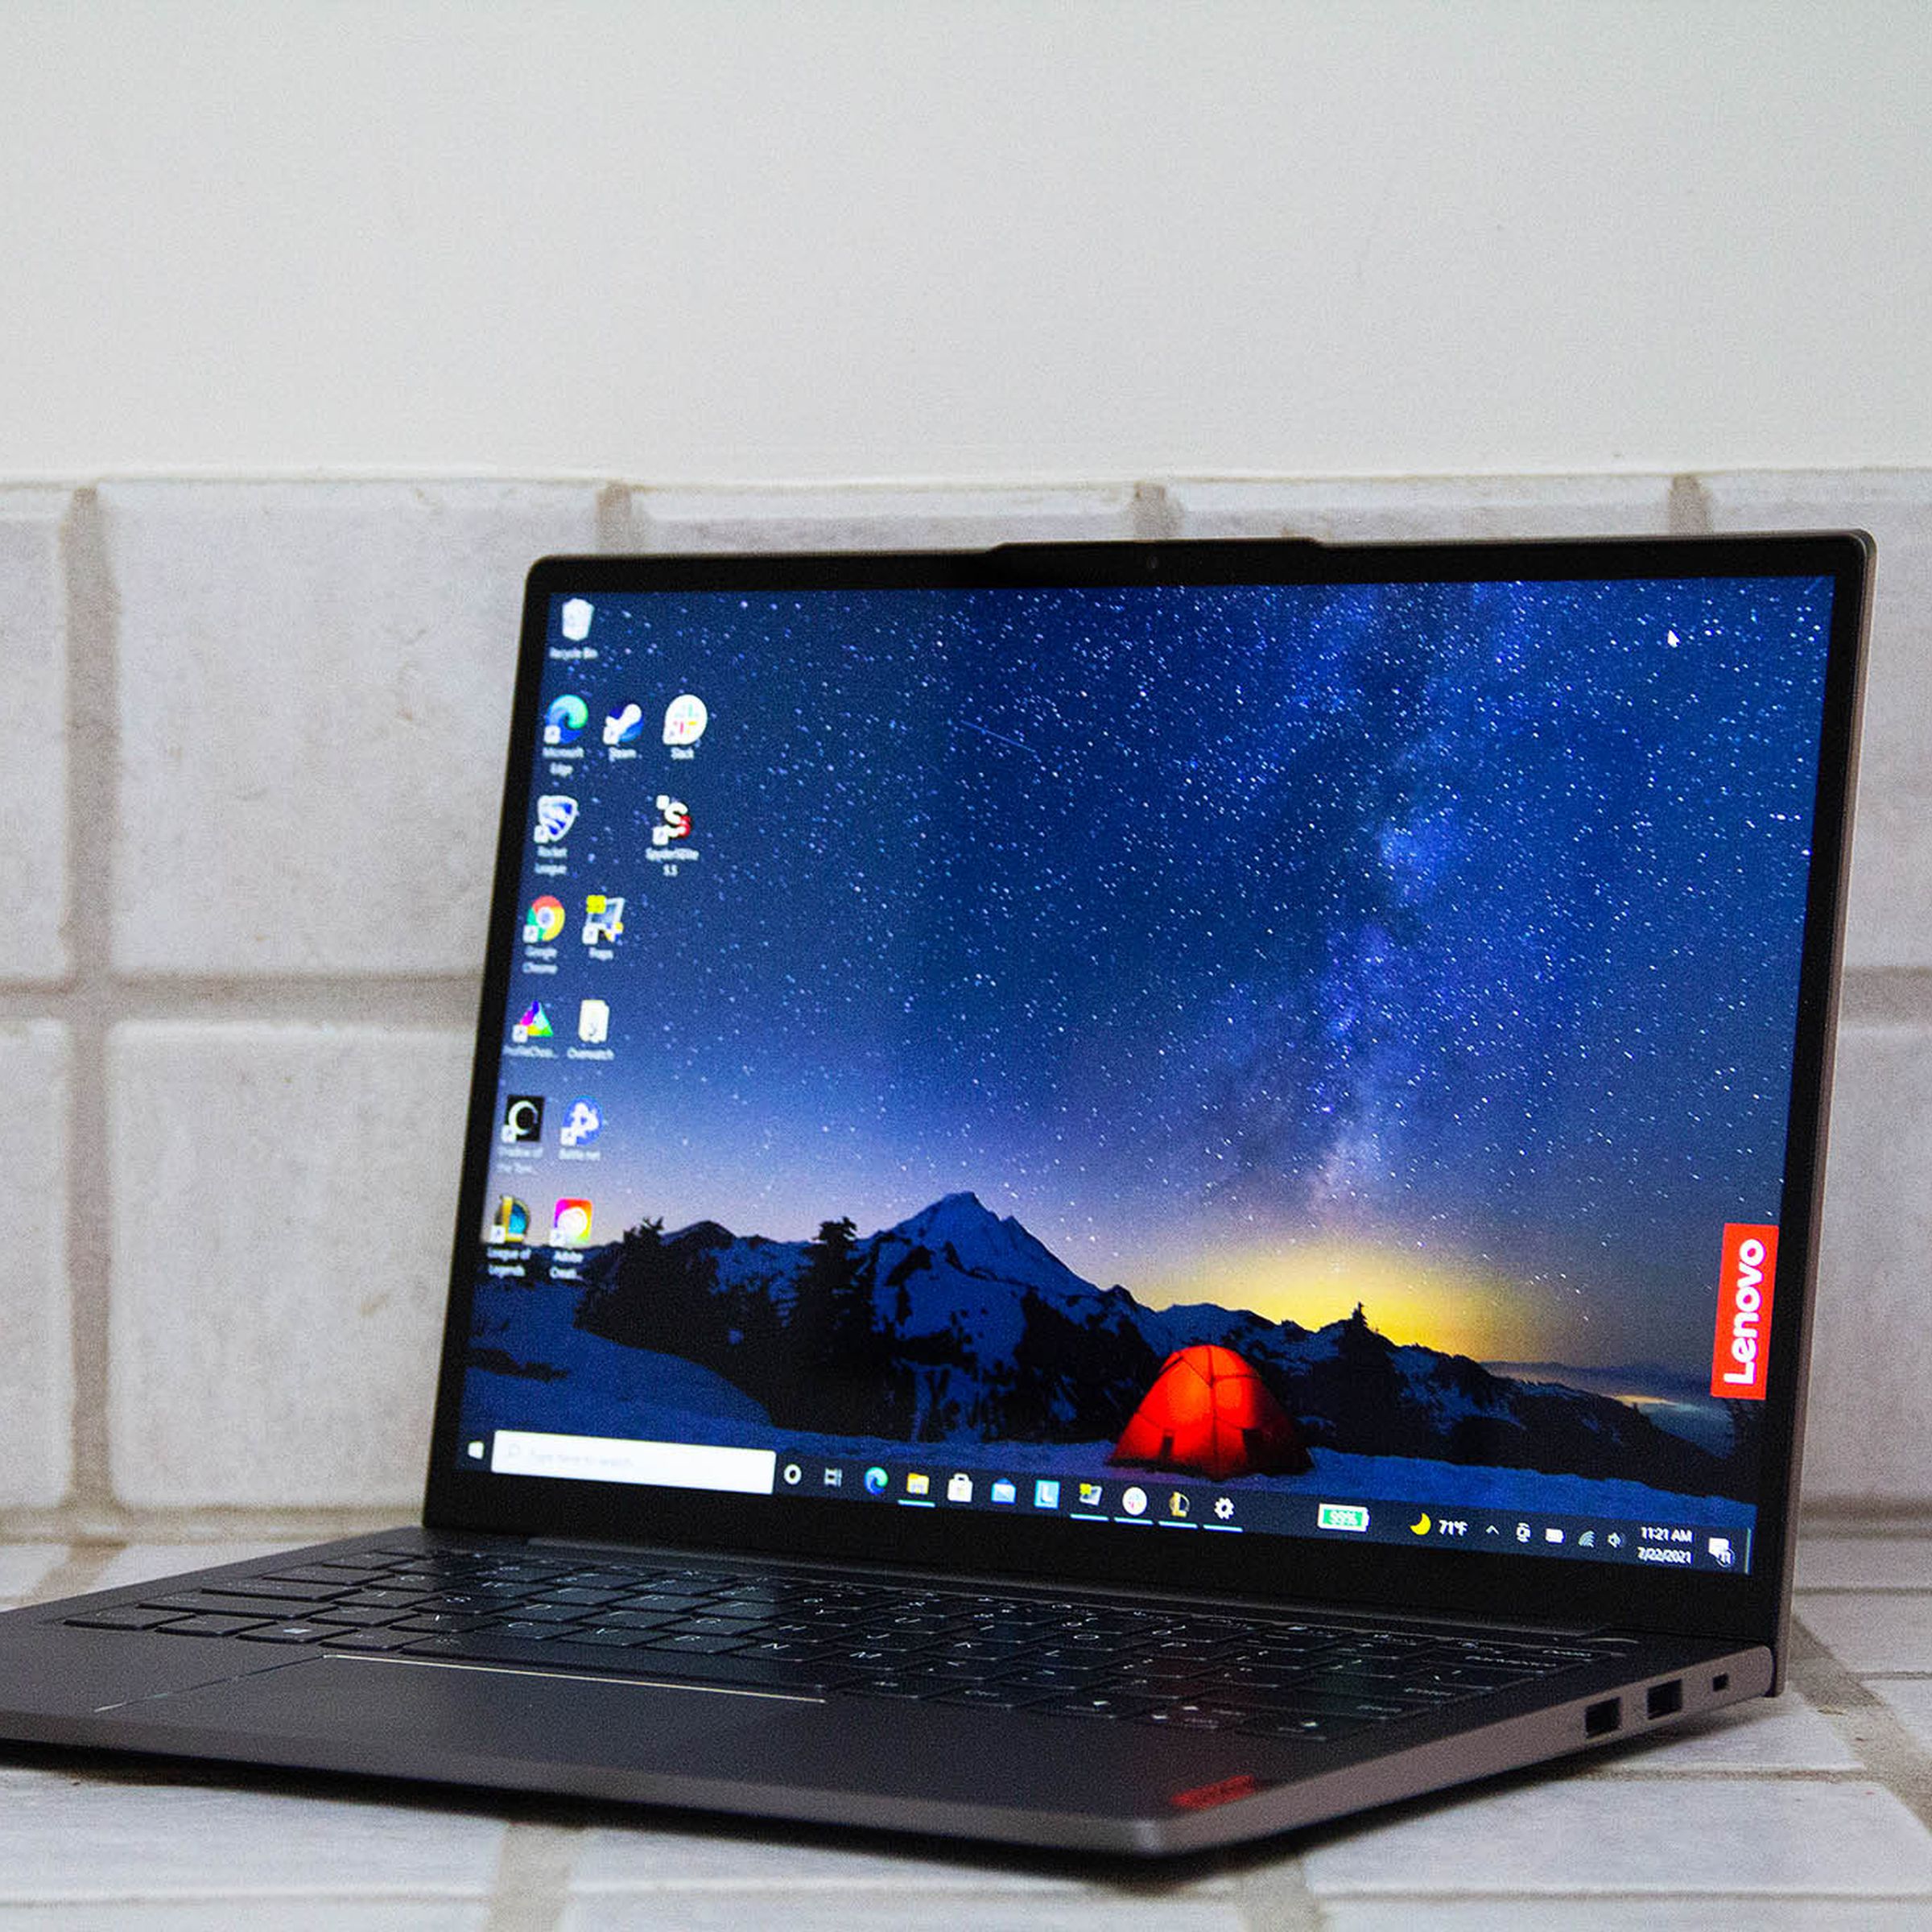 The Lenovo ThinkBook 13s on a white tiled counter, open, angled to the left. The screen displays a night mountain scene with a red tent in the center and the red Lenovo banner on the right side.